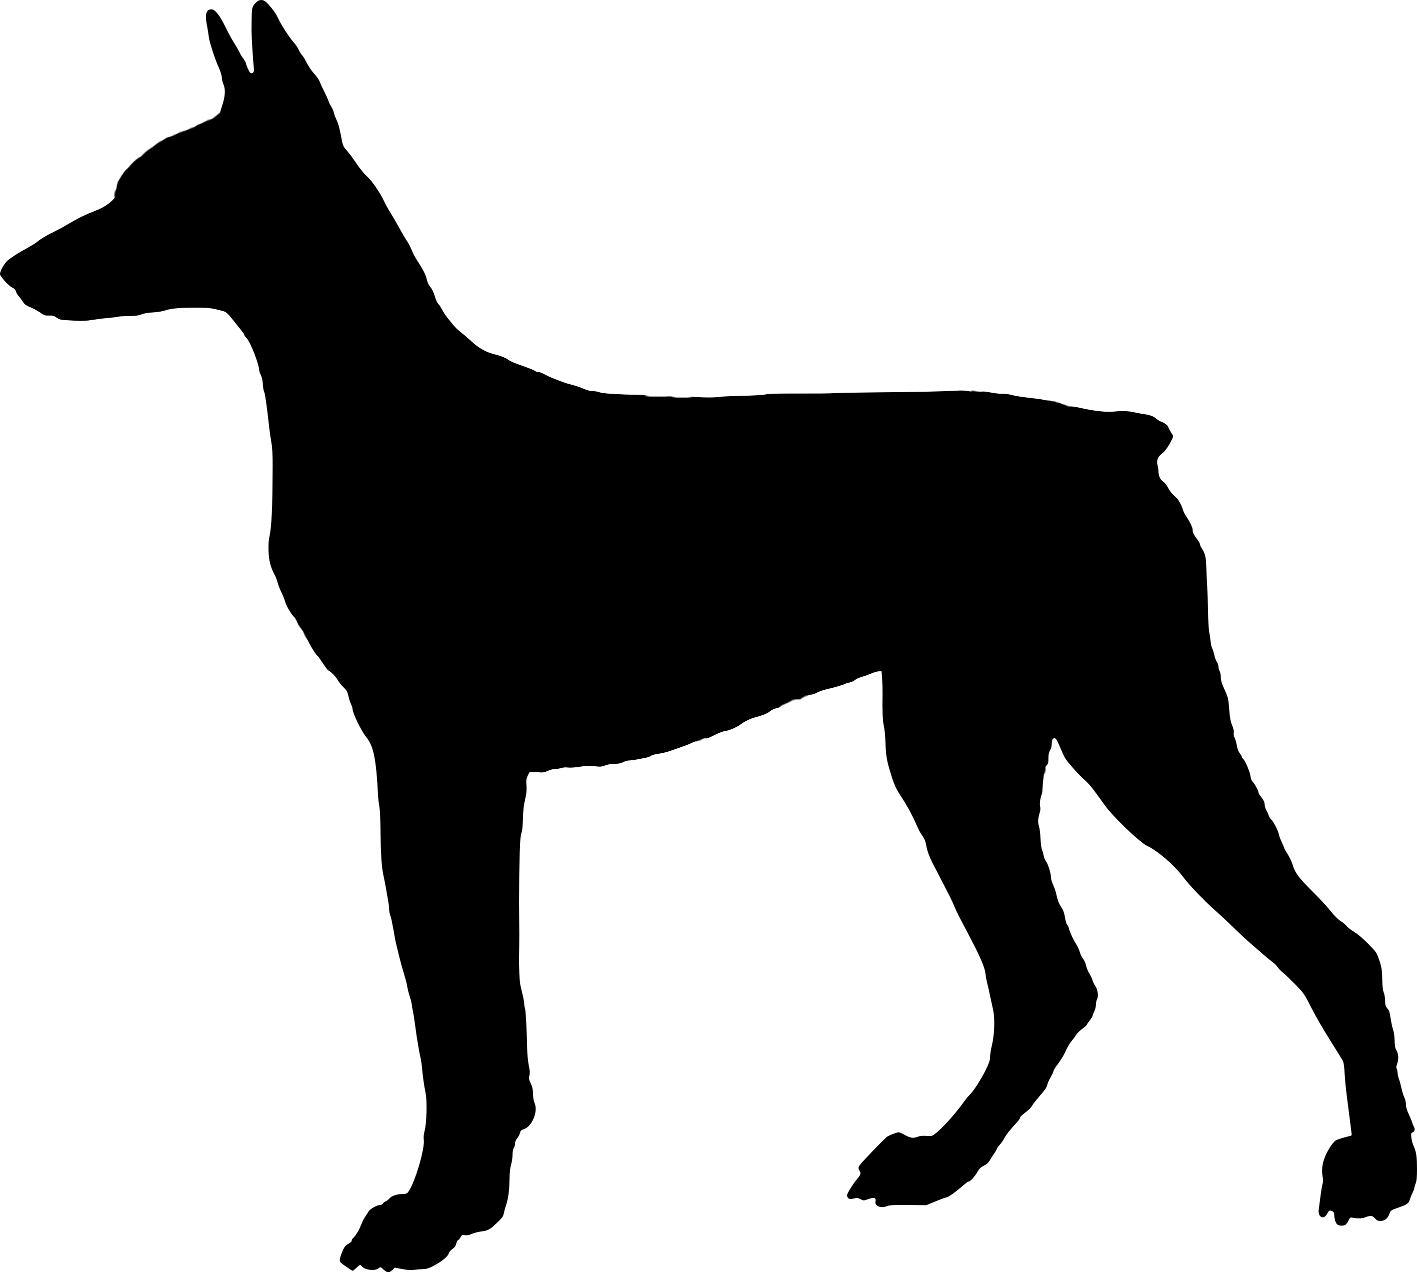 The best free Pinscher vector images. Download from 10 free.